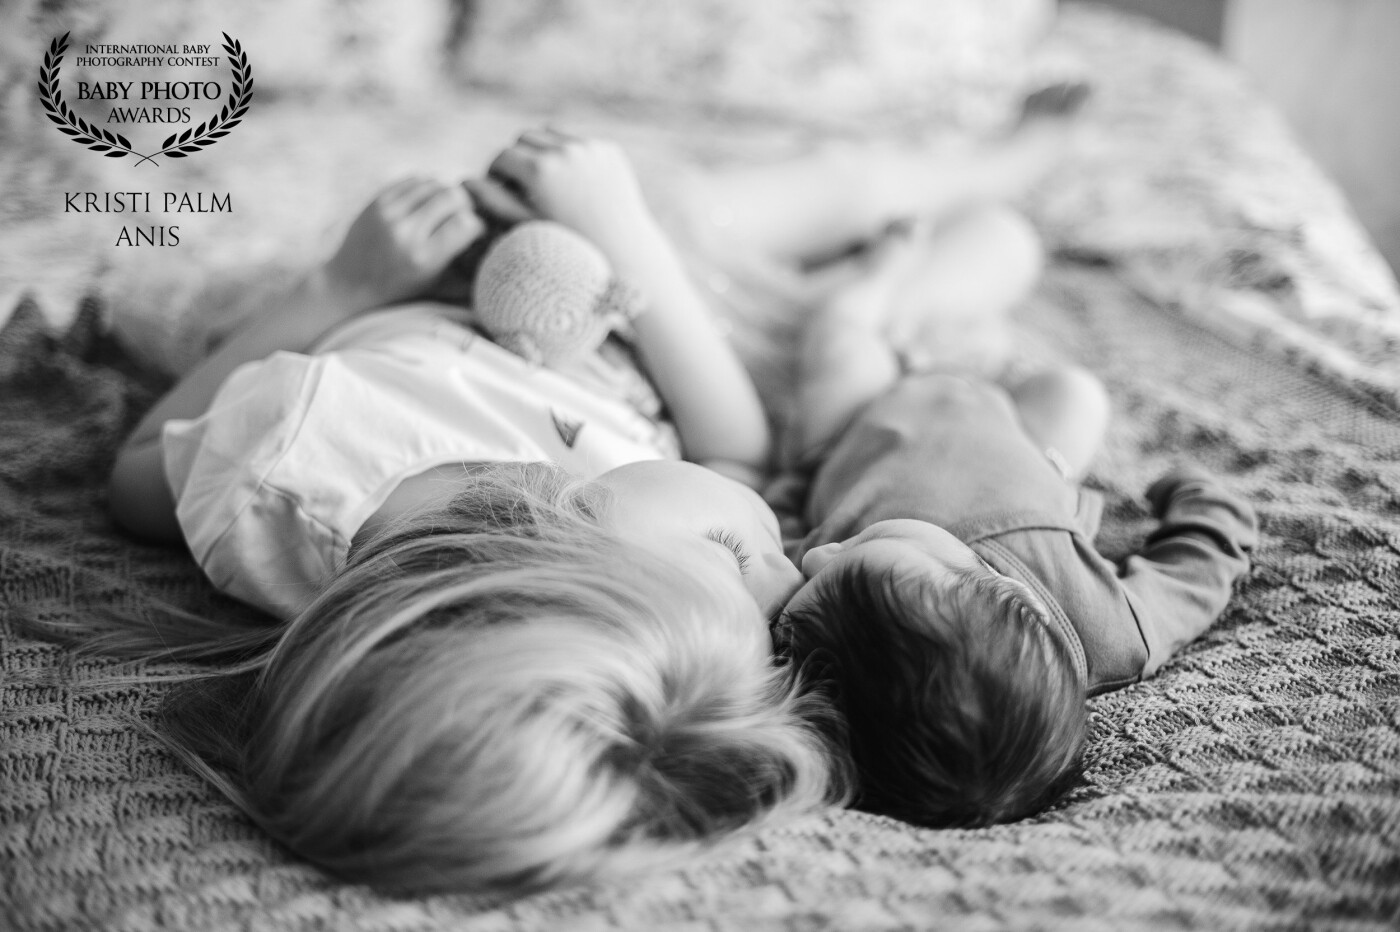 The sweetest little second between an older sister and her baby brother. This photo embodies everything I love when photographing kids in general -  natural and relaxed style, the sincerest emotions and moments to treasure.